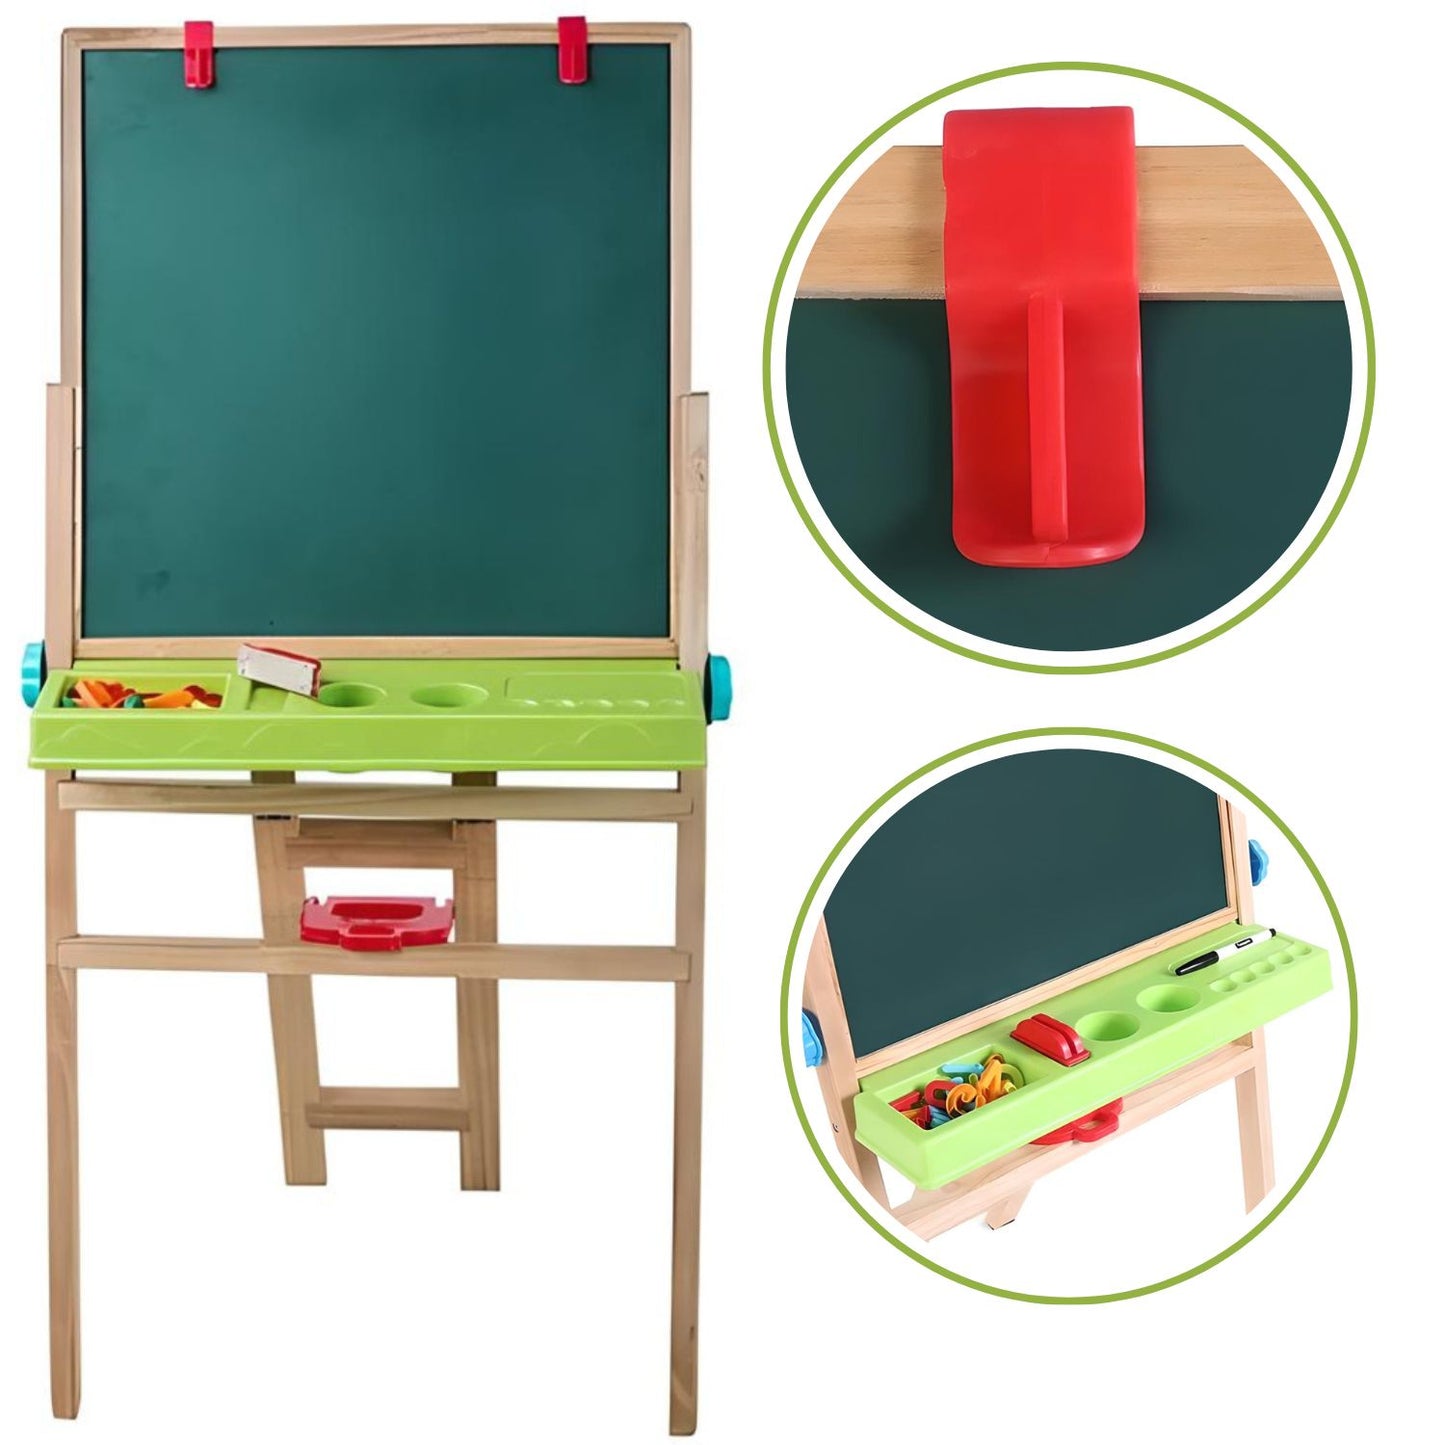 GIGGLES MY FIRST EASEL 4 IN 1 MULTICOLOR WOODEN FOR 3 TO 10 YEARS